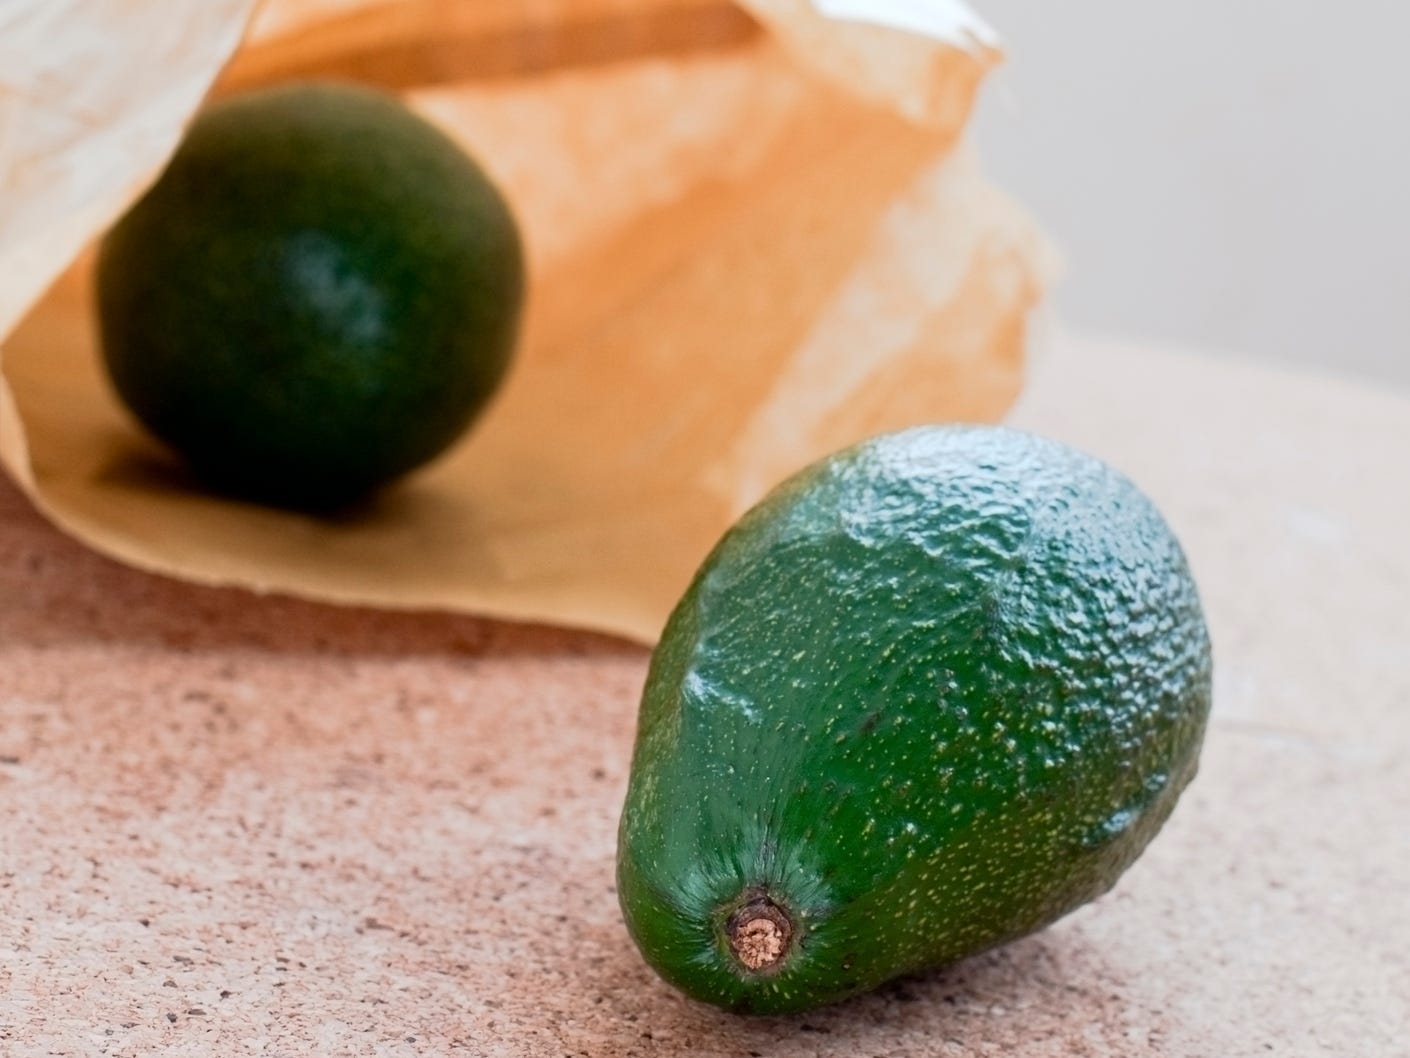 Download How to ripen avocados quickly without compromising taste ...